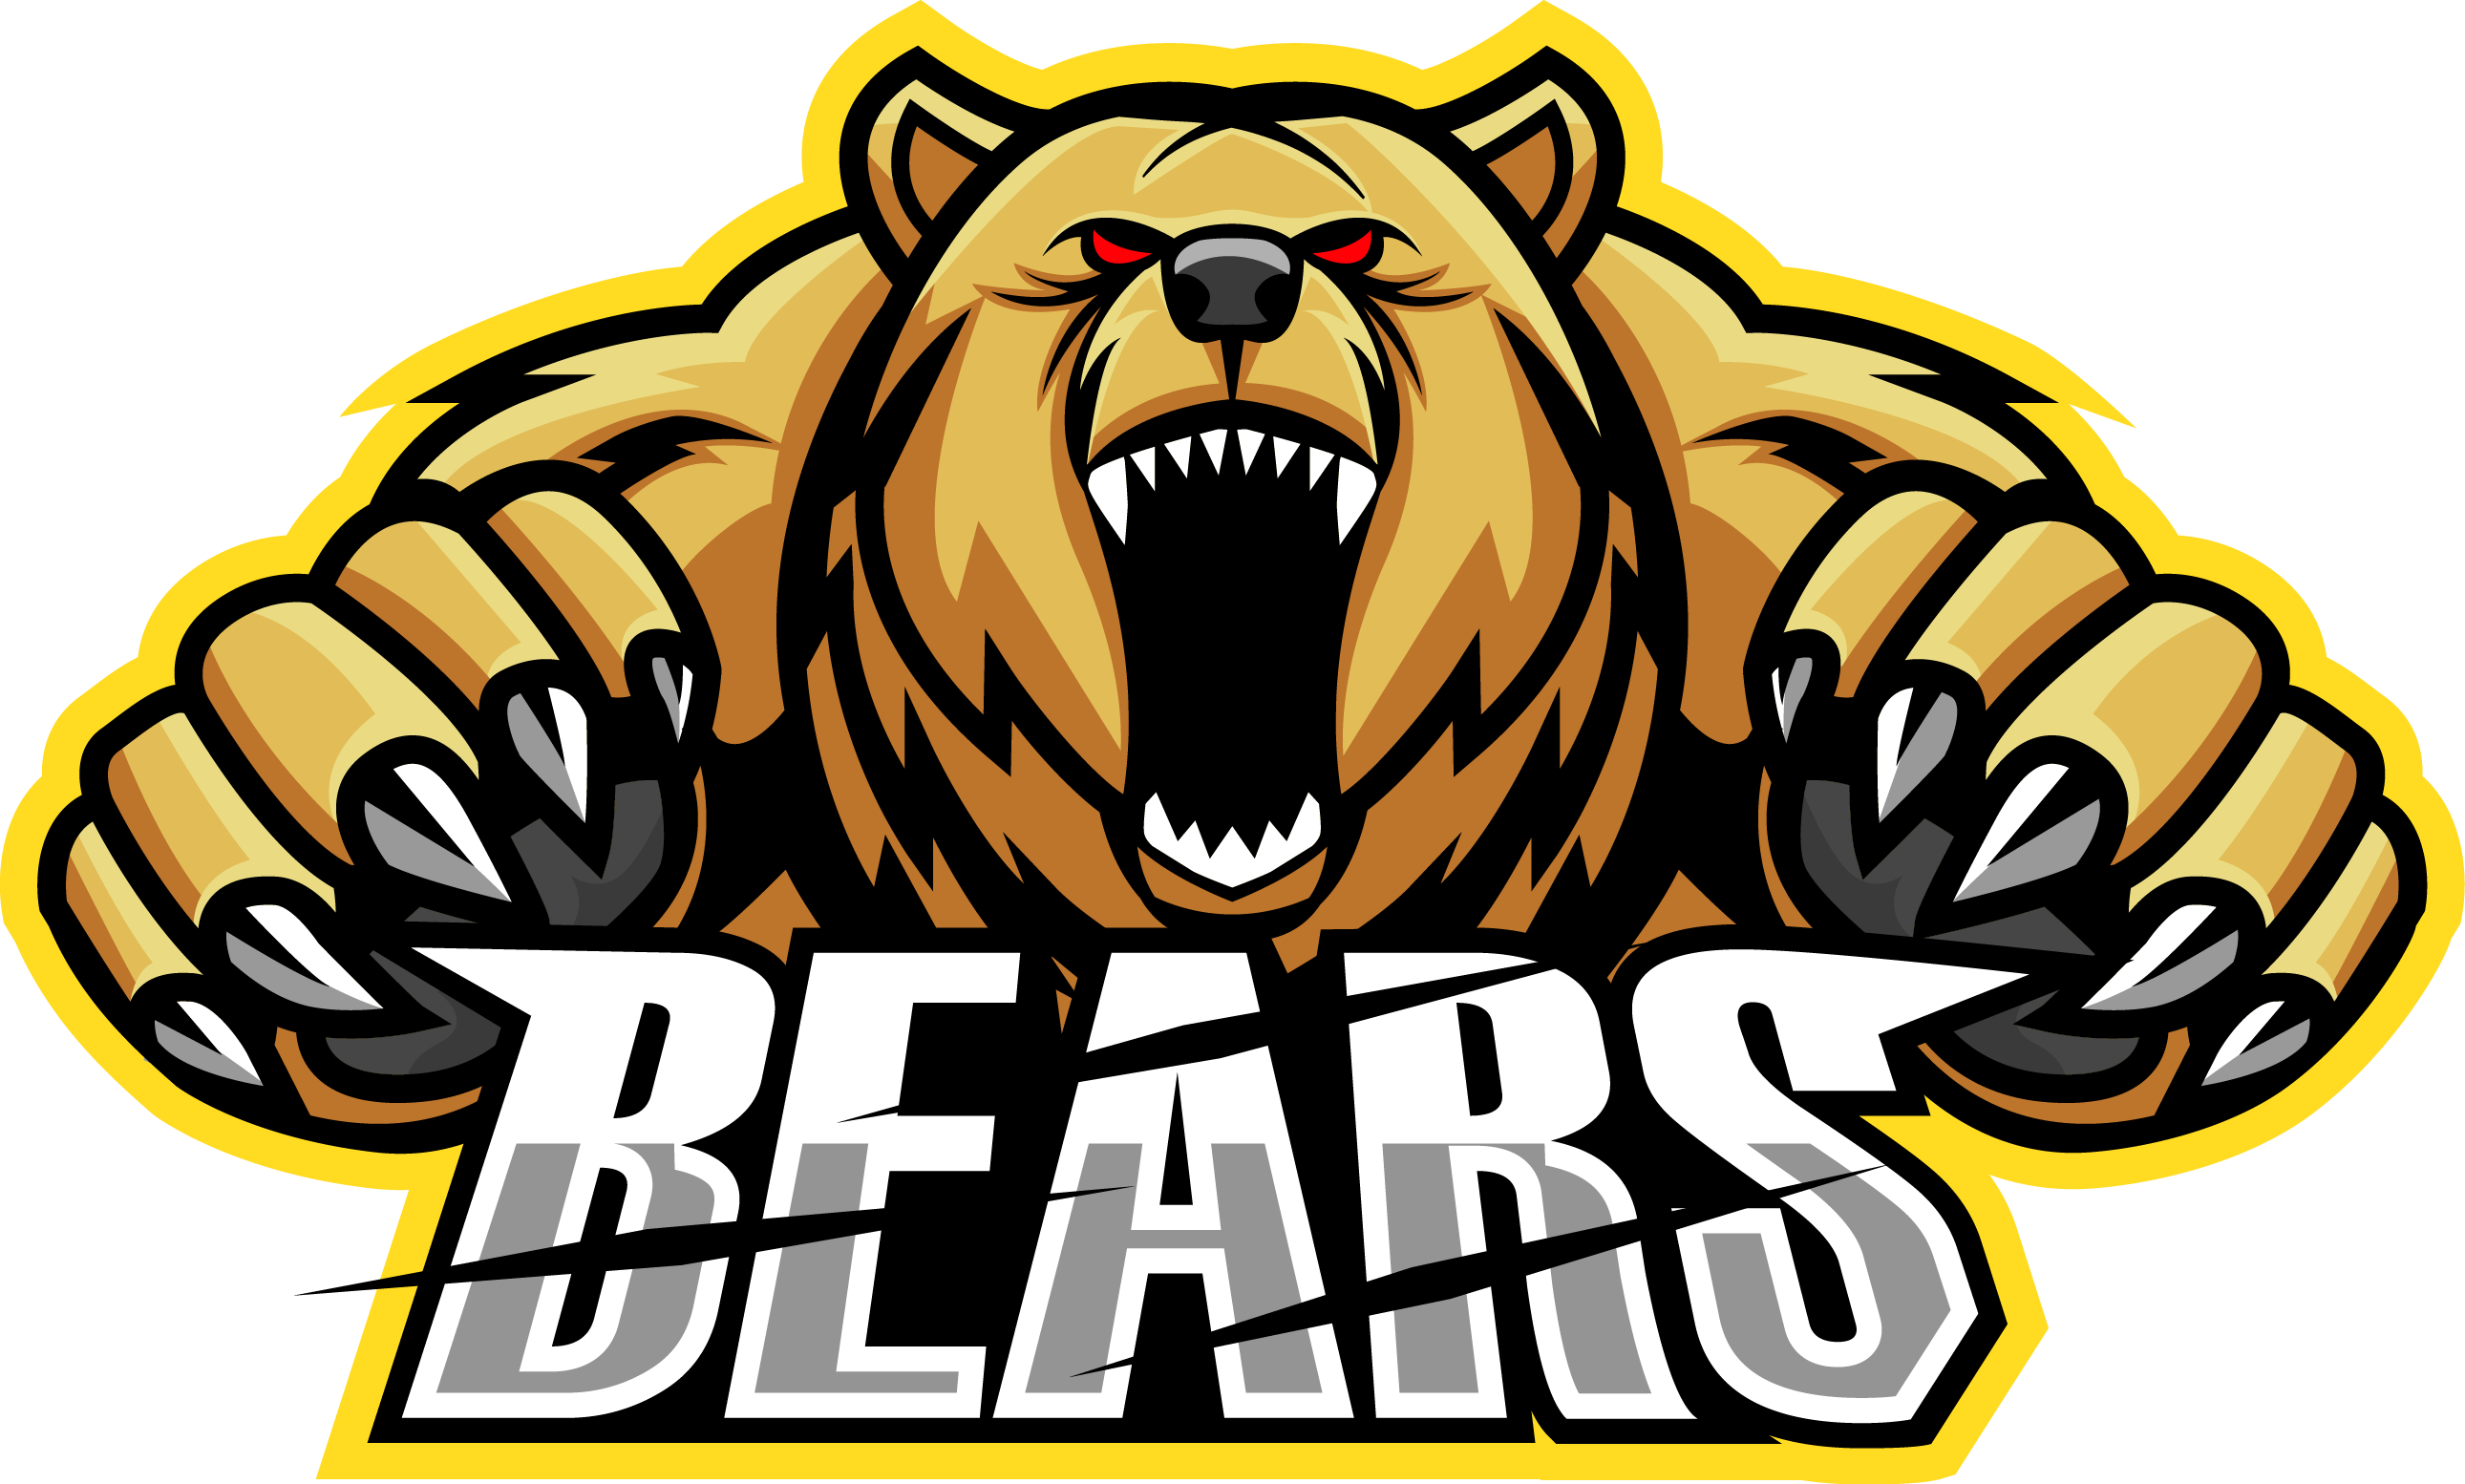 Modern professional angry bears mascot logo design By Visink